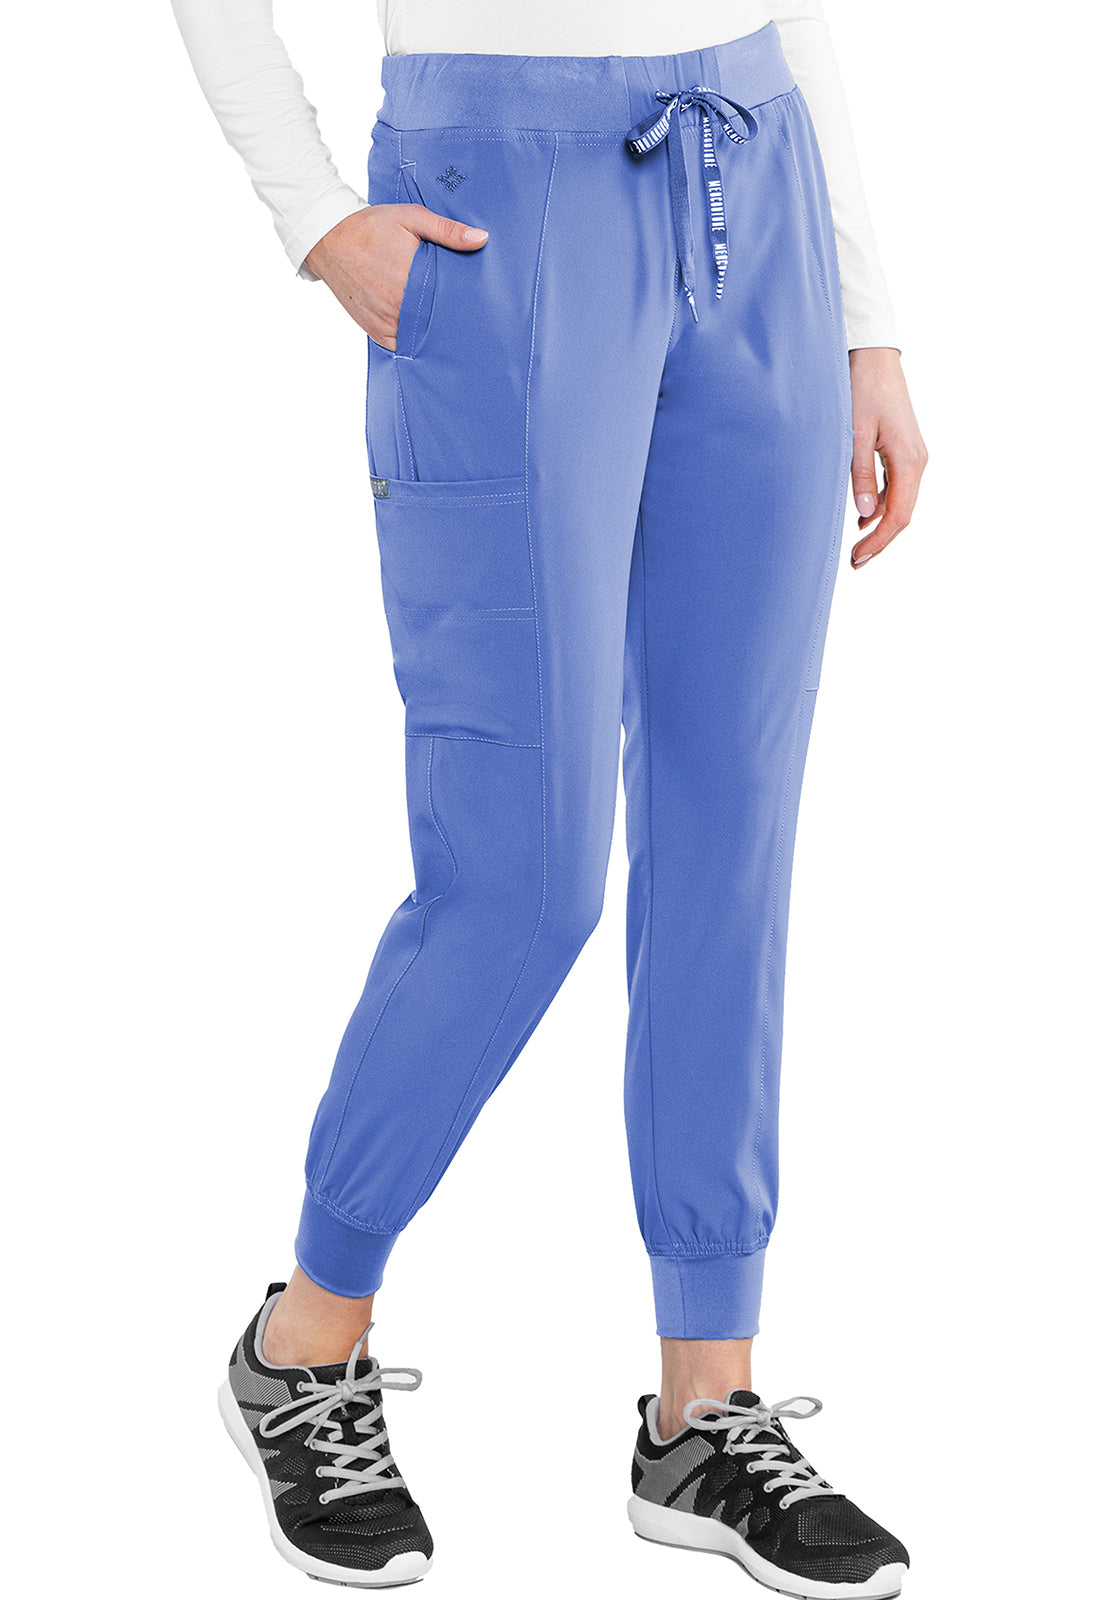 Clearance Med Couture Peaches Tall Seamed Jogger Pants